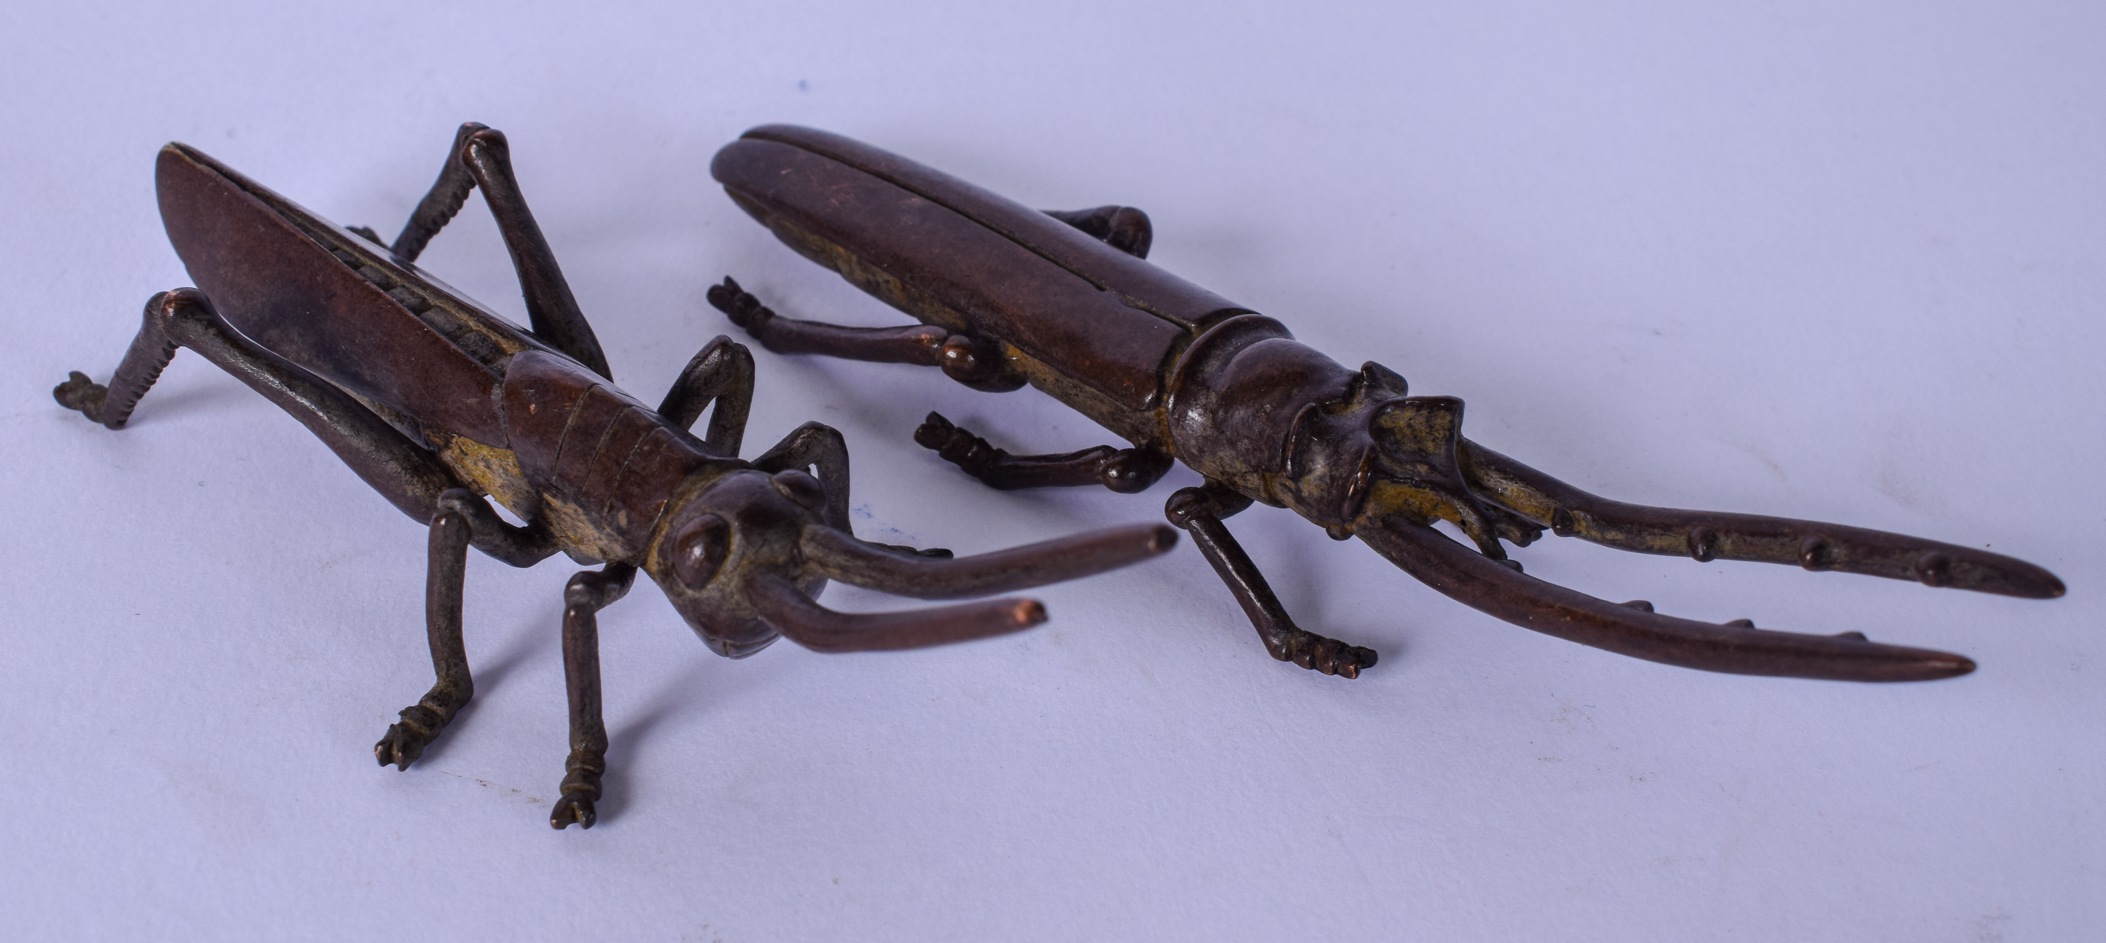 A JAPANESE TASIHO PERIOD BRONZE GRASS HOPPER, together with a beetle. 12.5 cm and 11.5 cm.